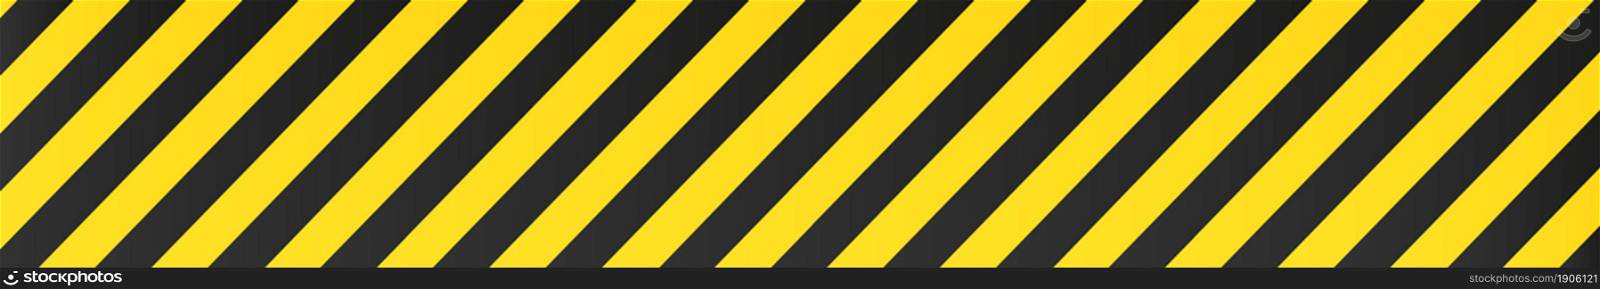 Black yellow background stripes. Risk sign abstract pattern vector illustration. Black yellow background stripes. Risk sign abstract pattern vector